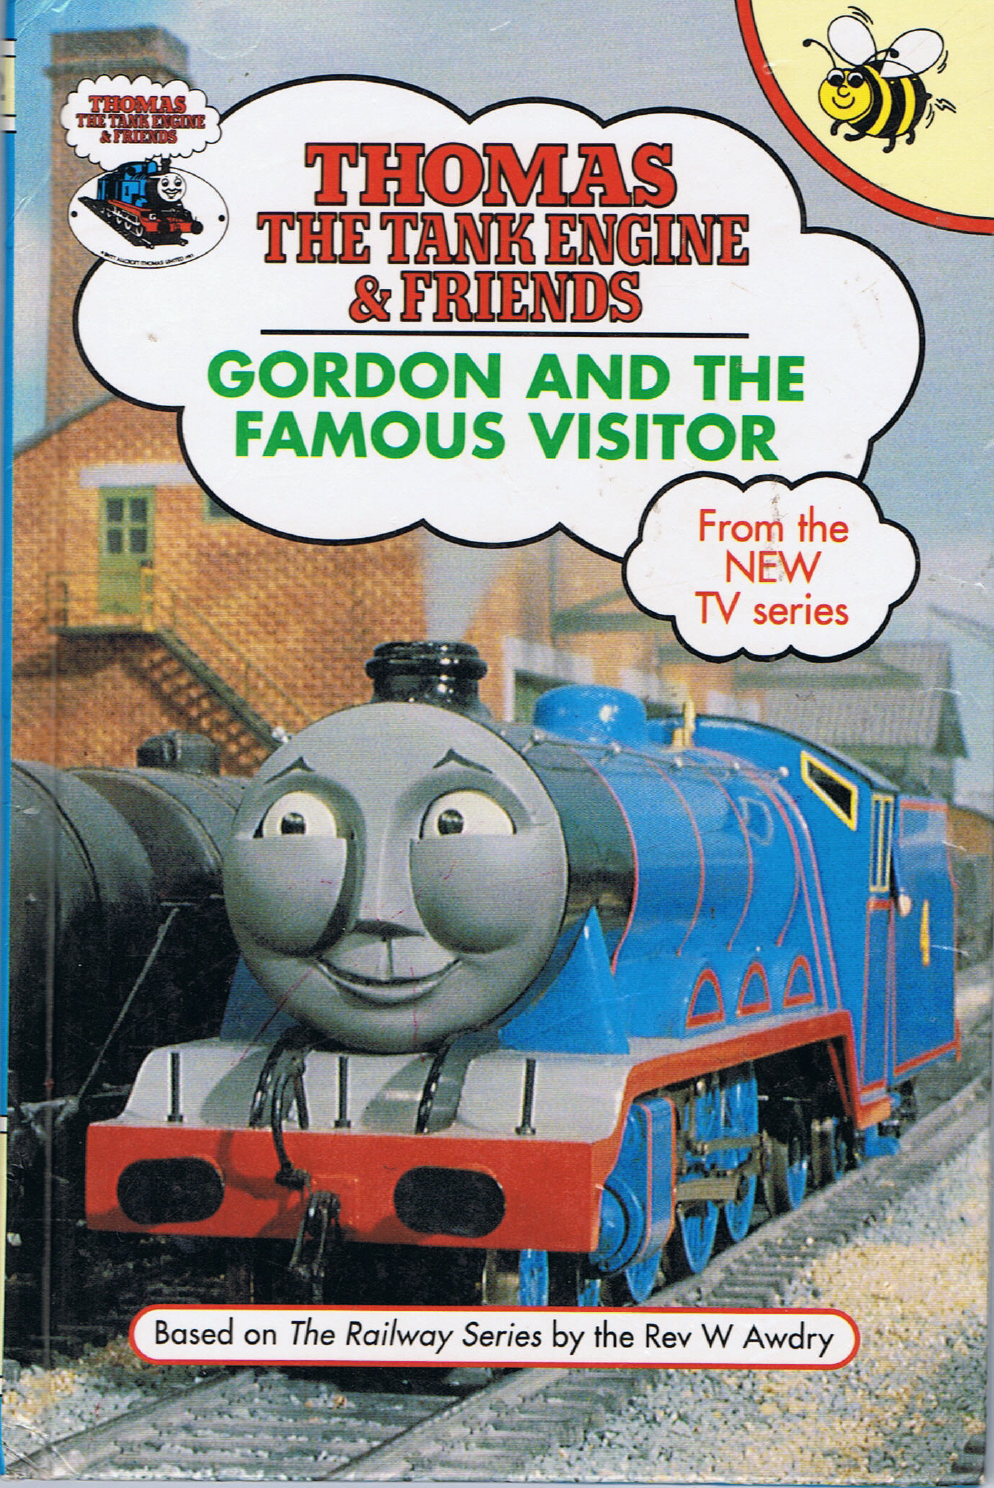 Gordon And The Famous Visitor Buzz Book Thomas The Tank Engine Wikia